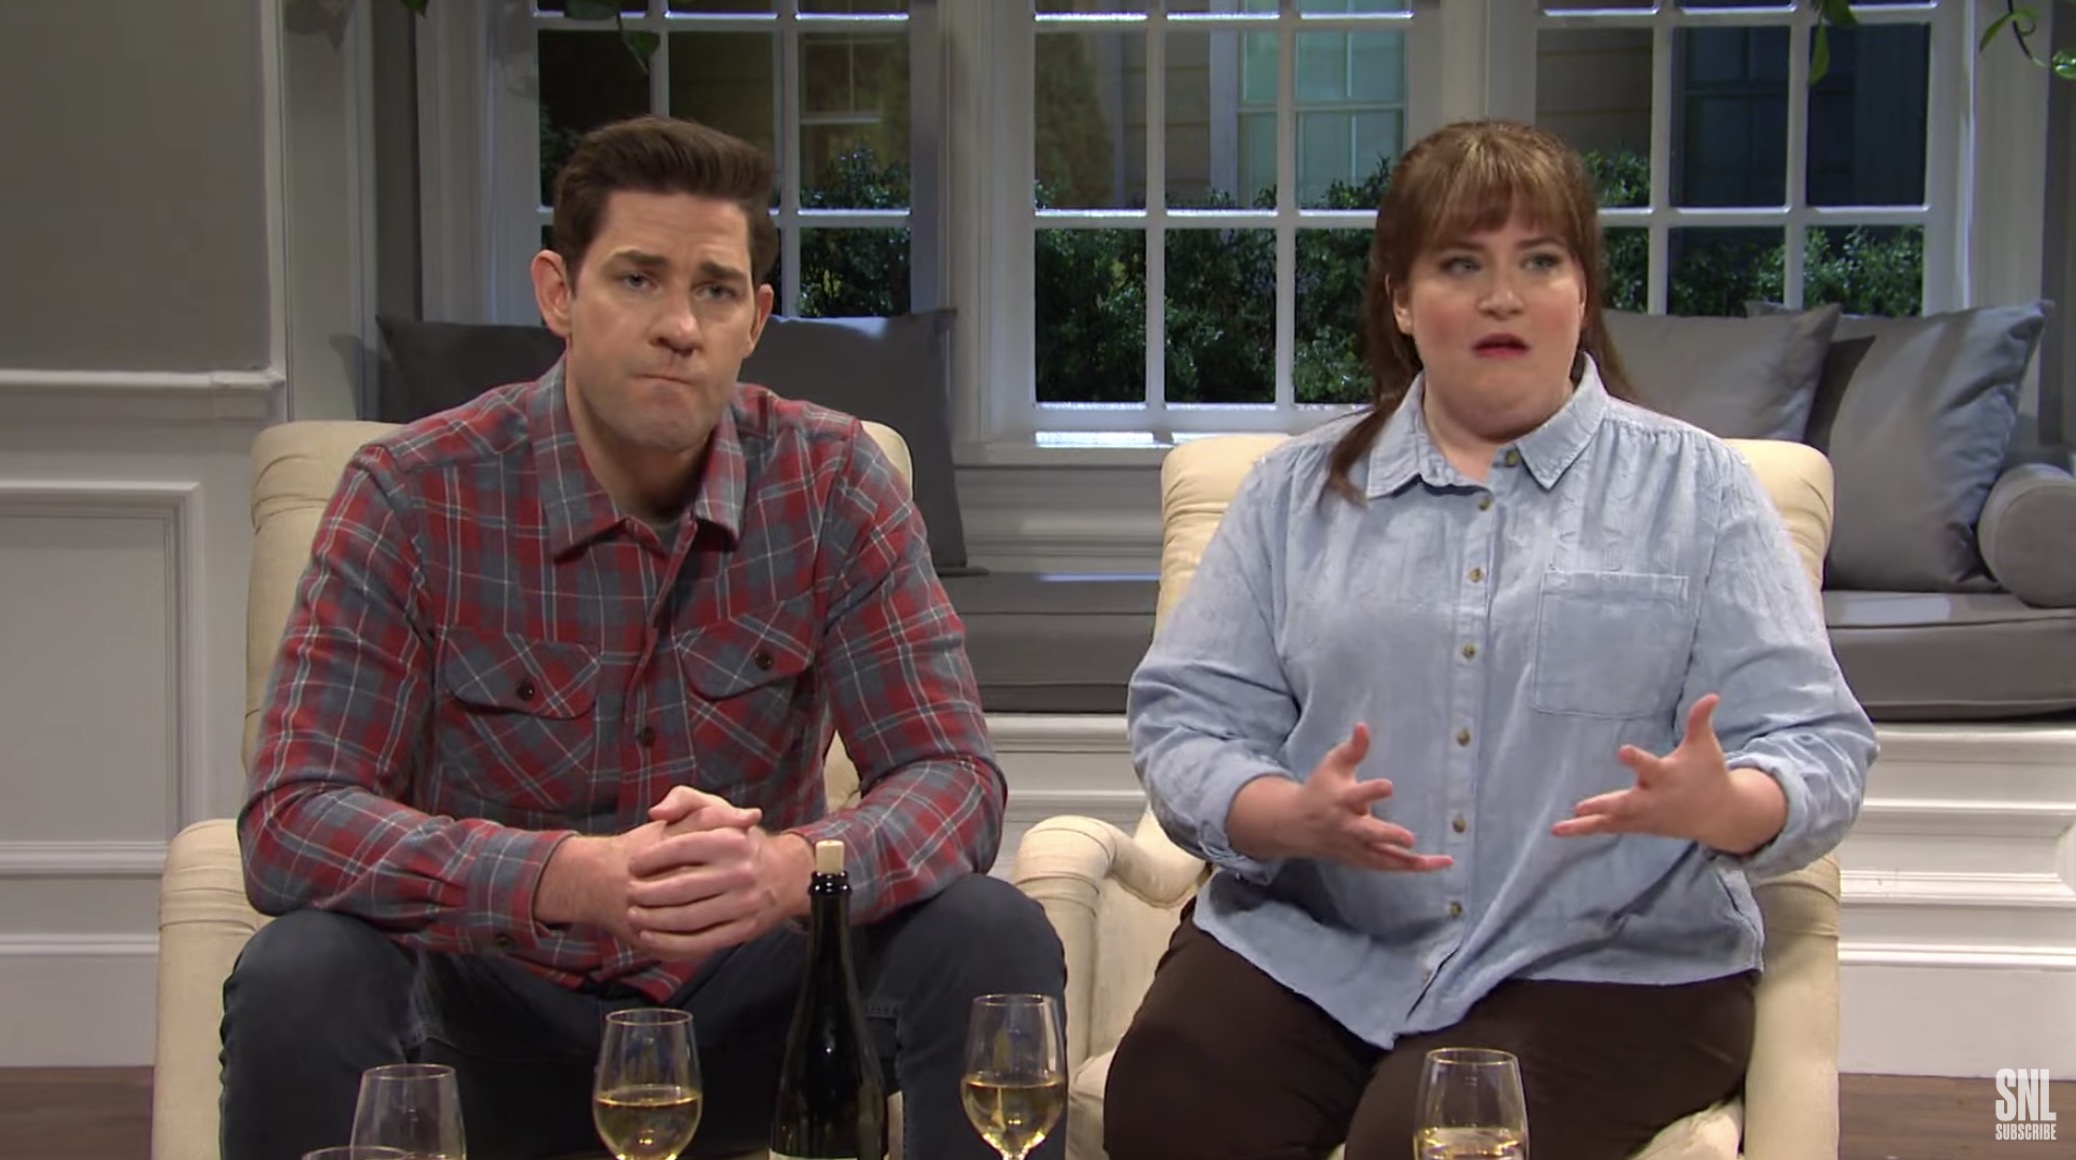 Newton Native John Krasinski Hosted Snl For The First Time See Some Of His Sketches The Boston Globe